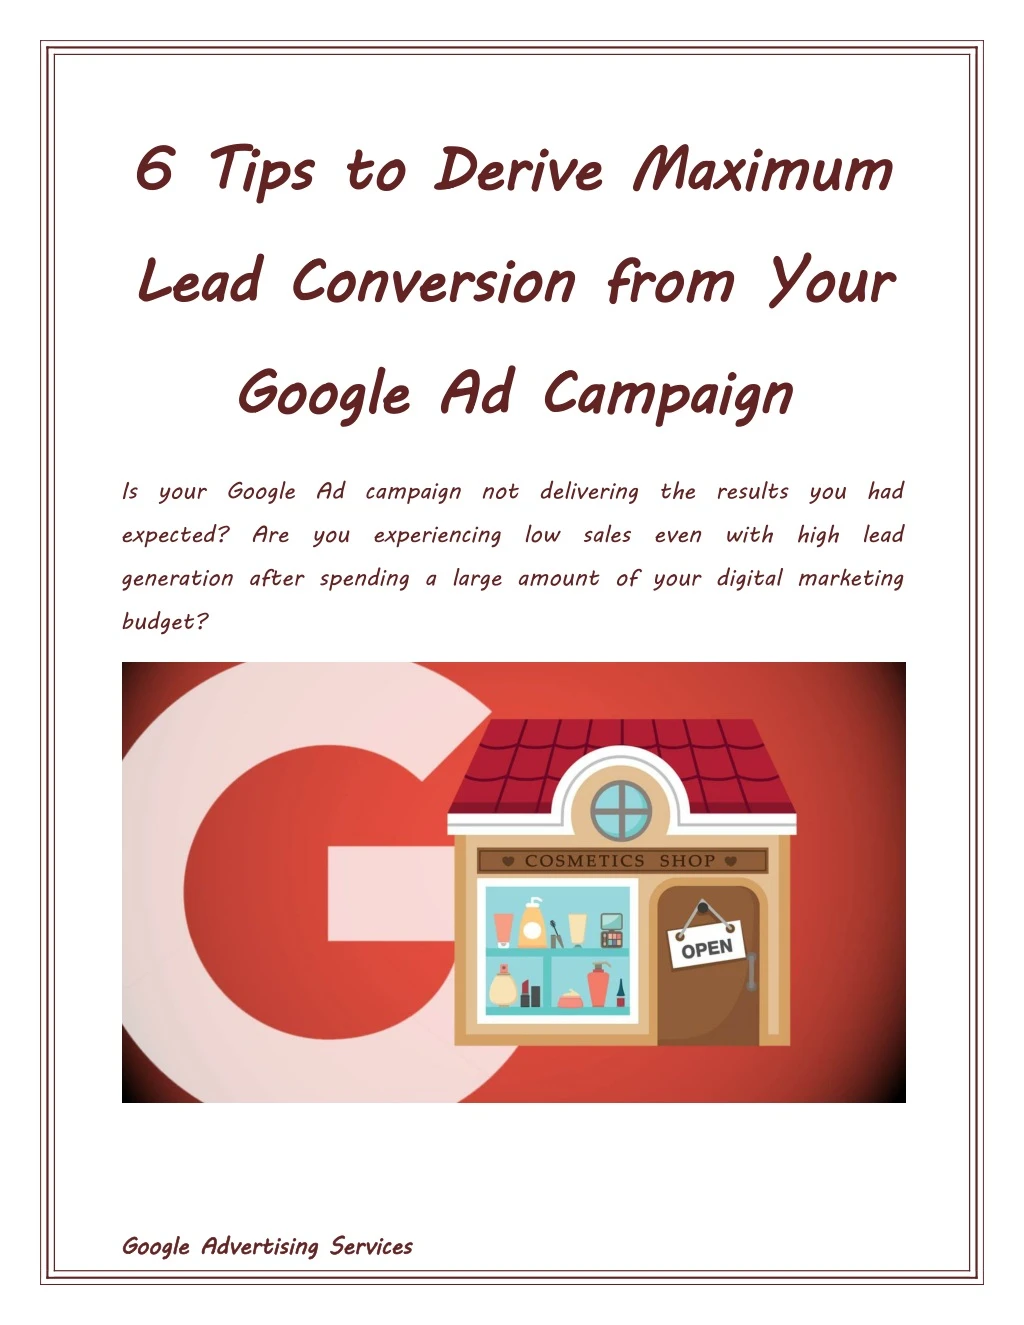 6 tips to derive maximum lead conversion from